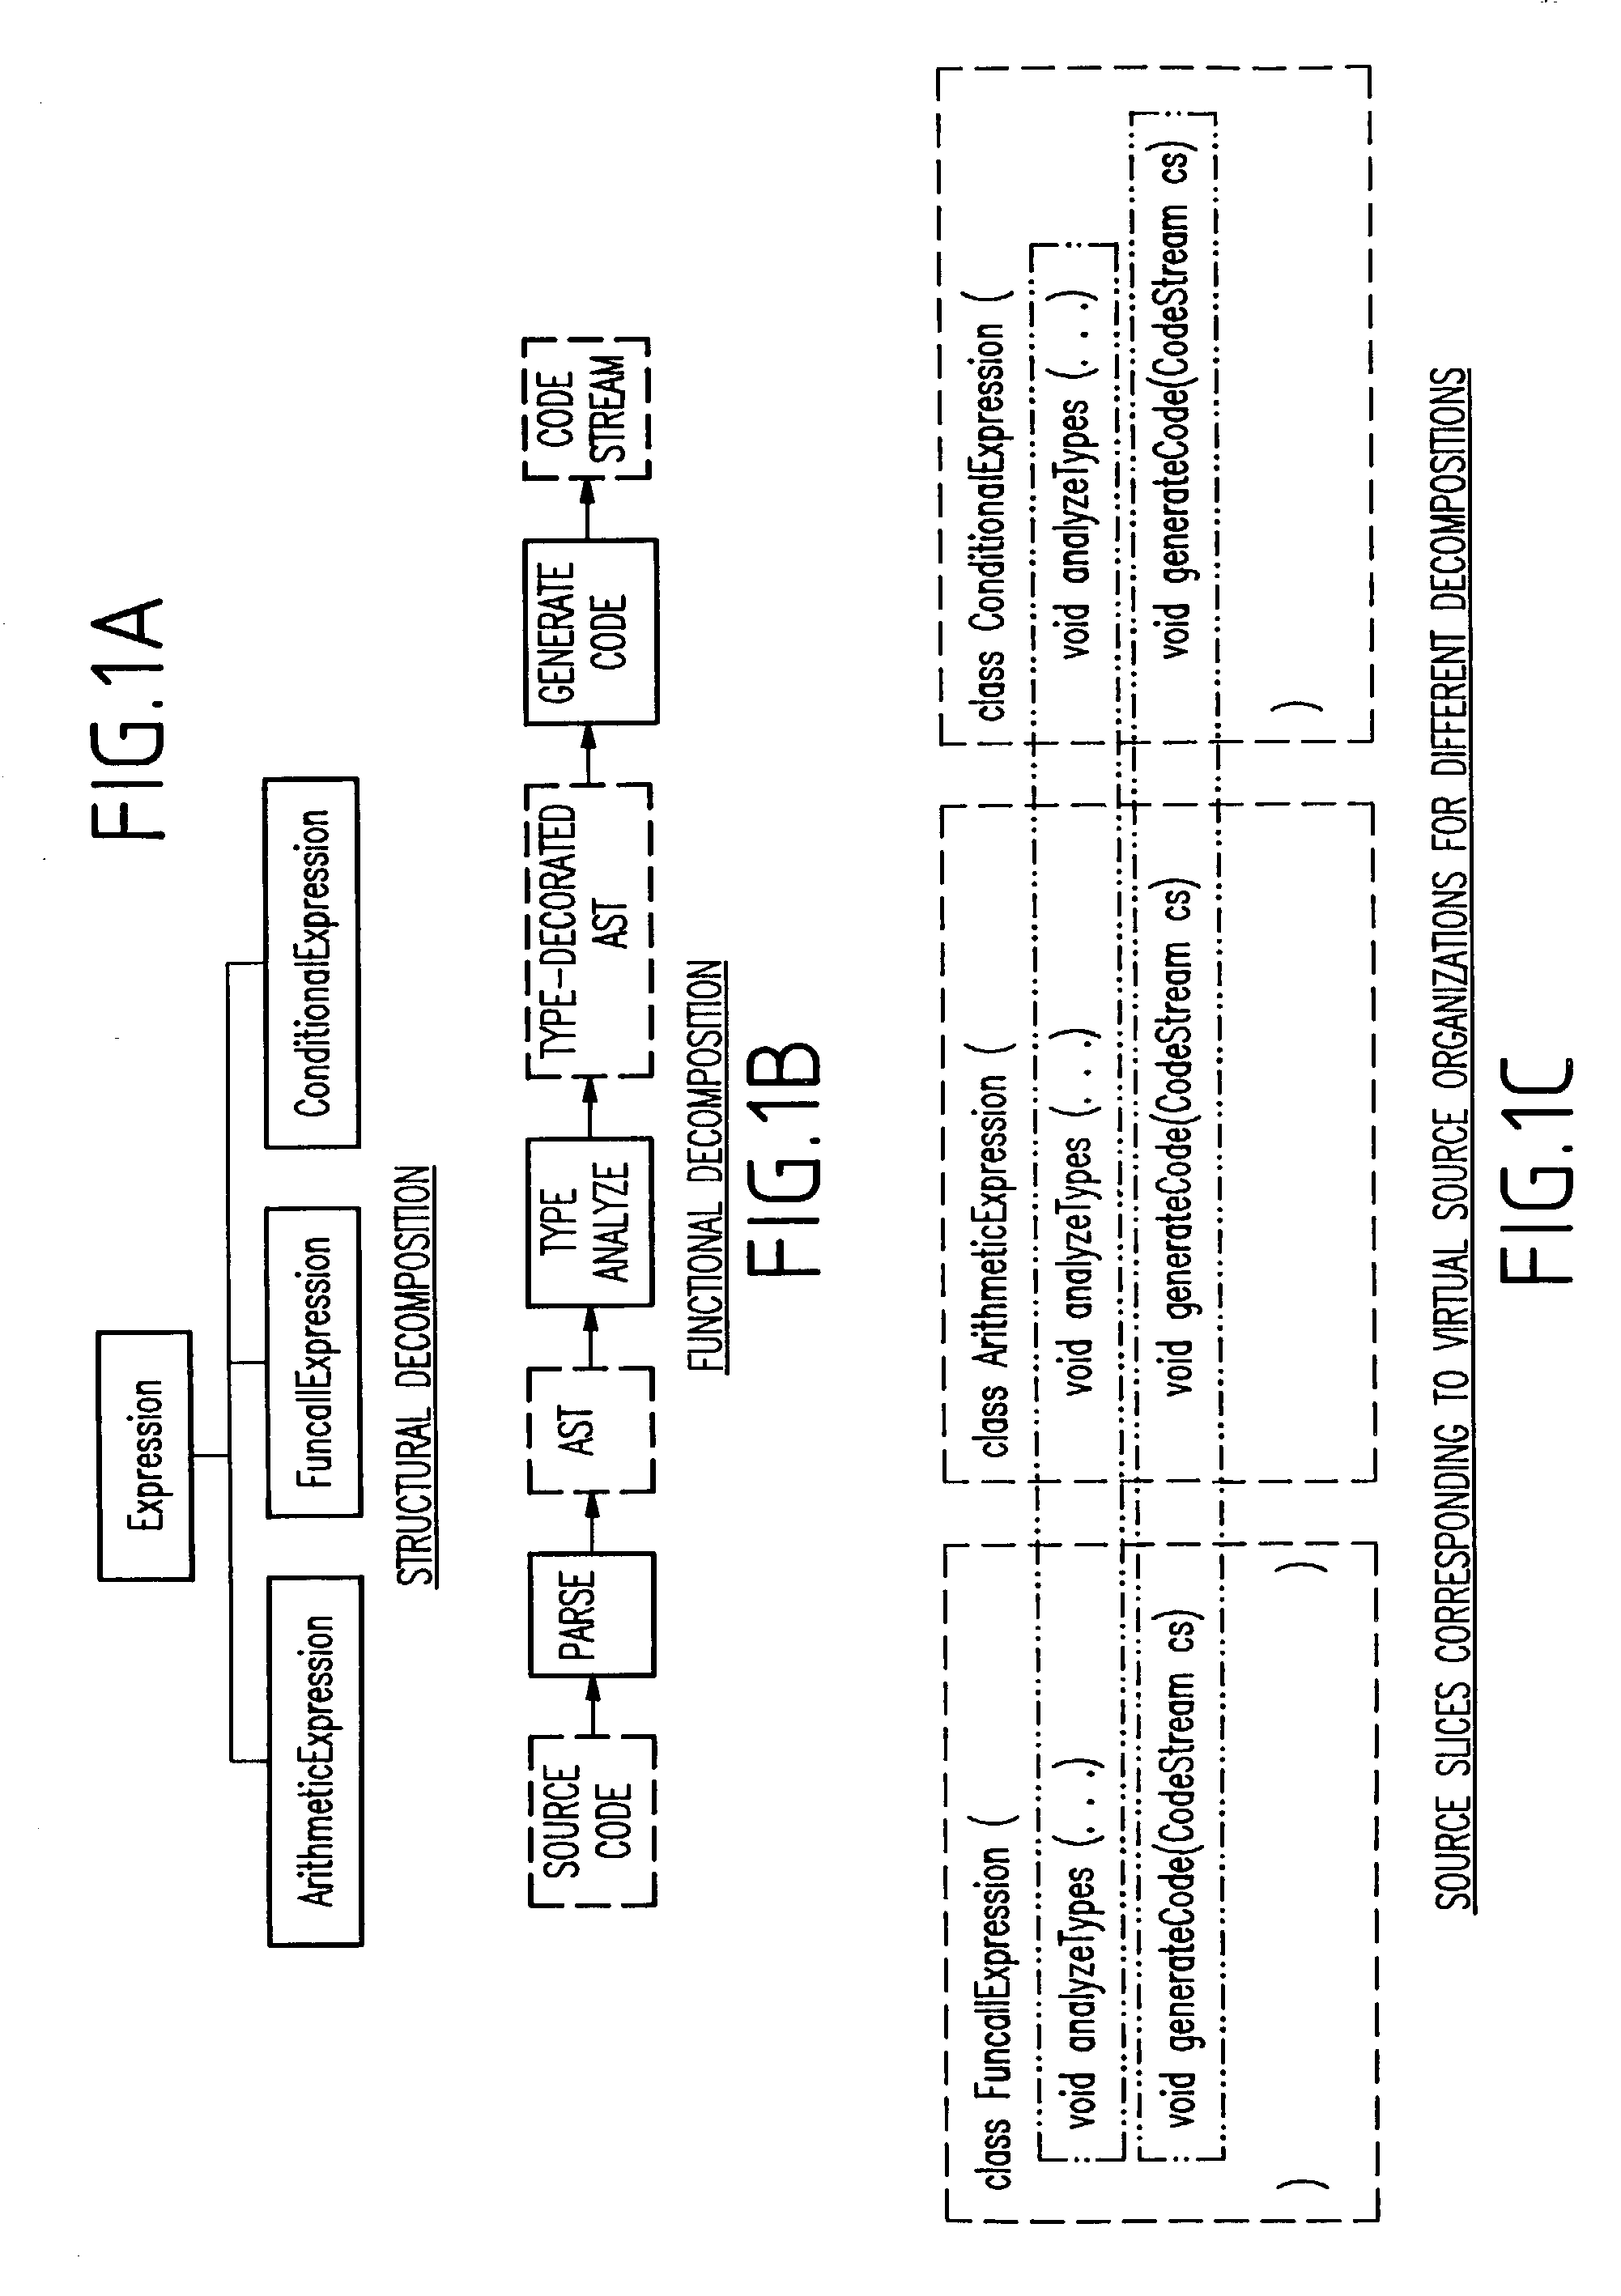 Method and structure for efficiently retrieving artifacts in a fine grained software configuration management repository